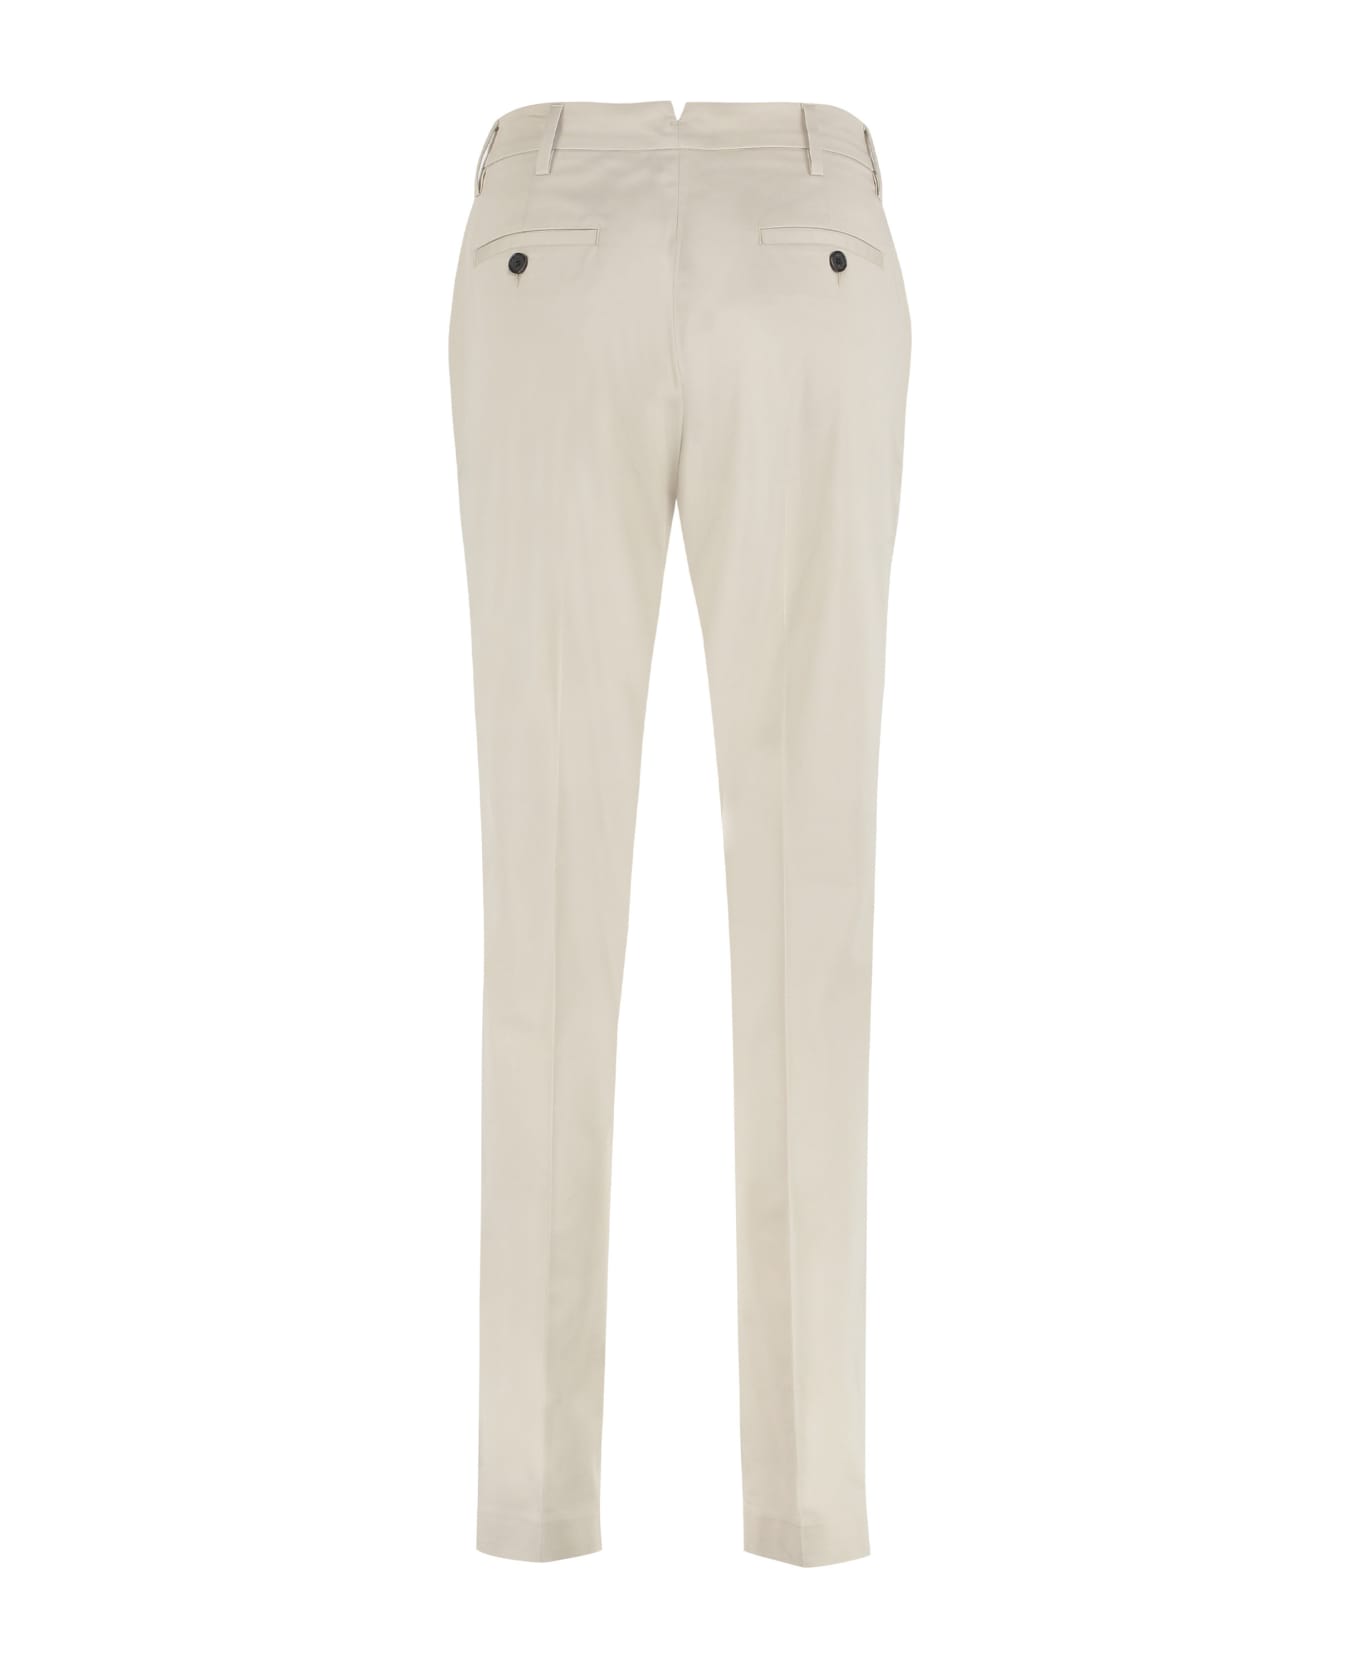 Department Five Stretch Cotton Trousers - Beige